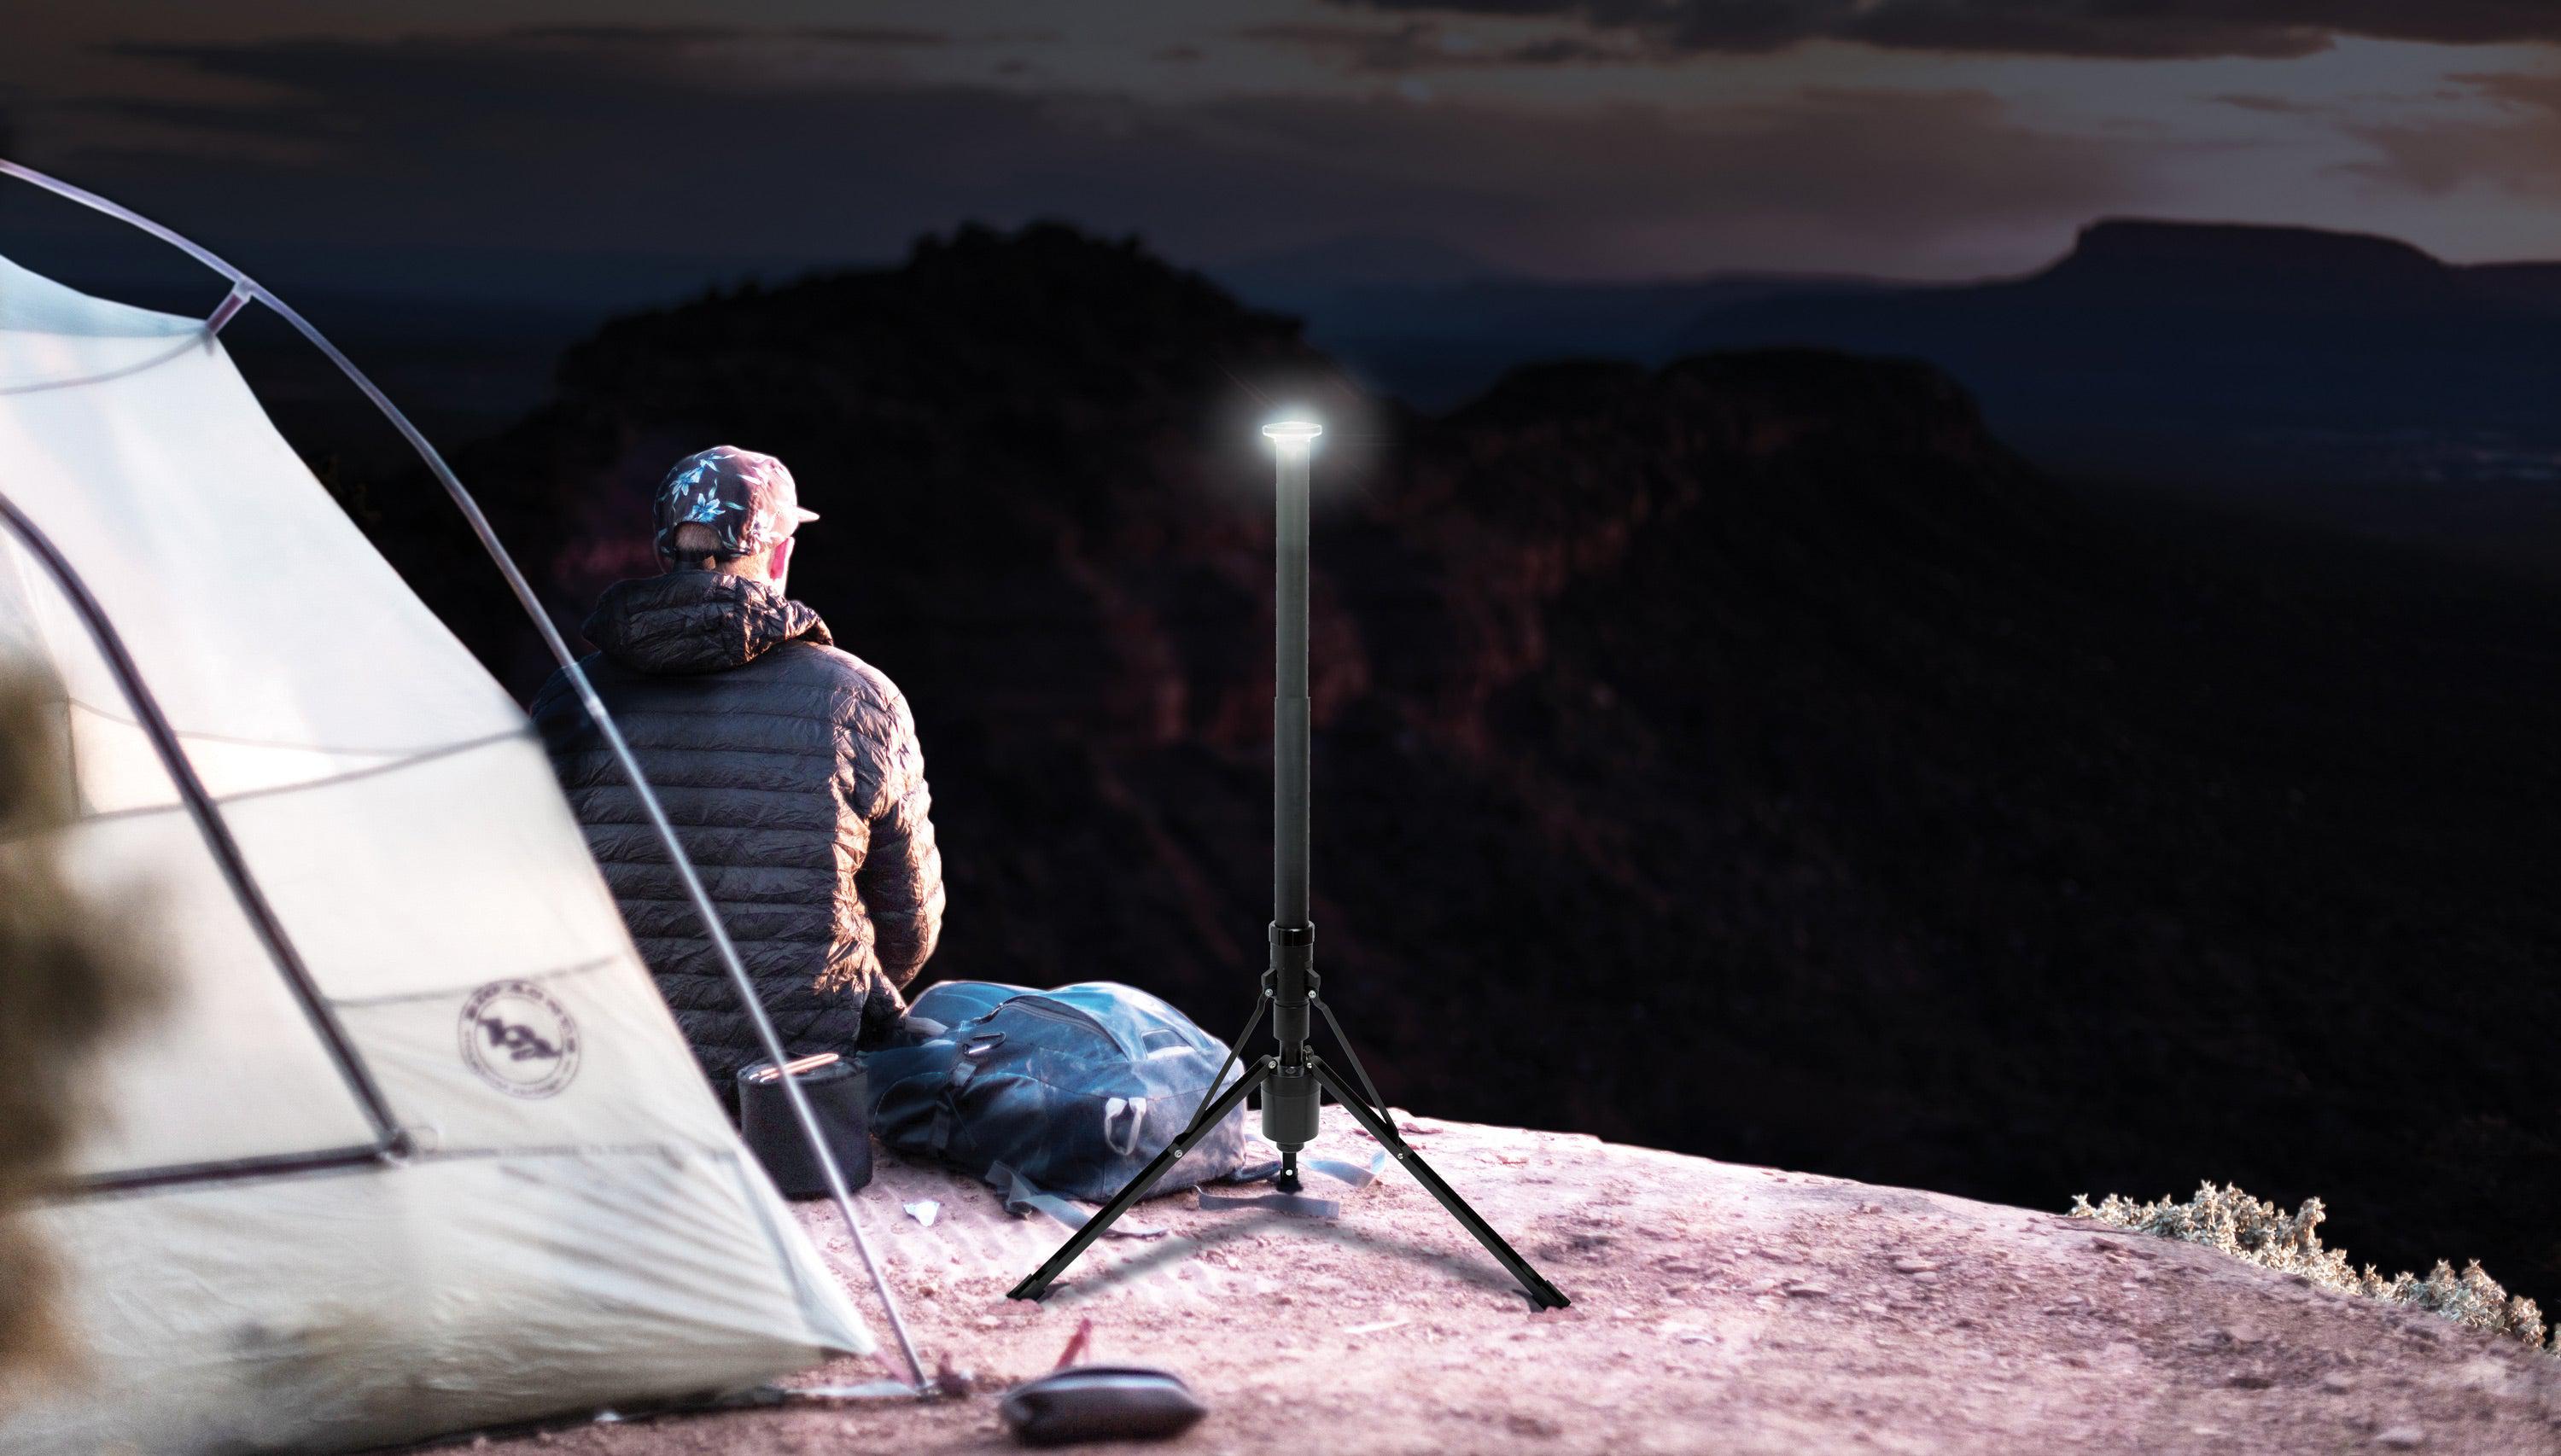 Male sitting on a mountainside overlooking mountains in the distance. He's surrounded by a tent and a FLi Over-Lander.